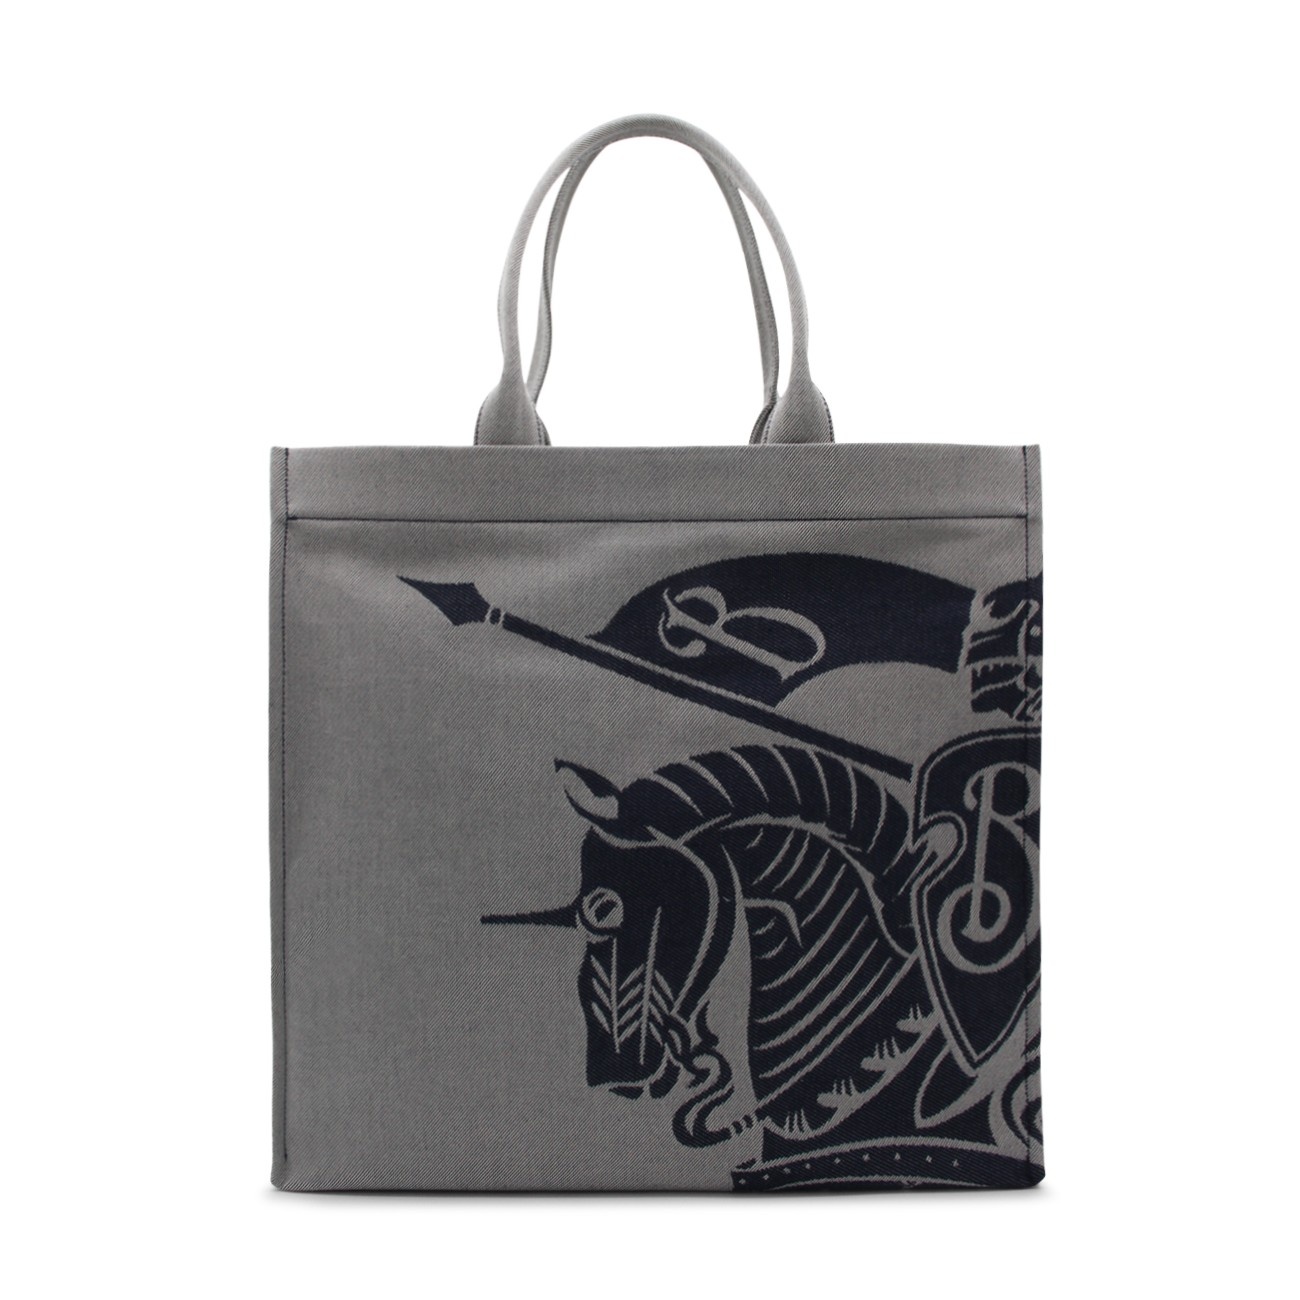 grey leather tote bag - 1